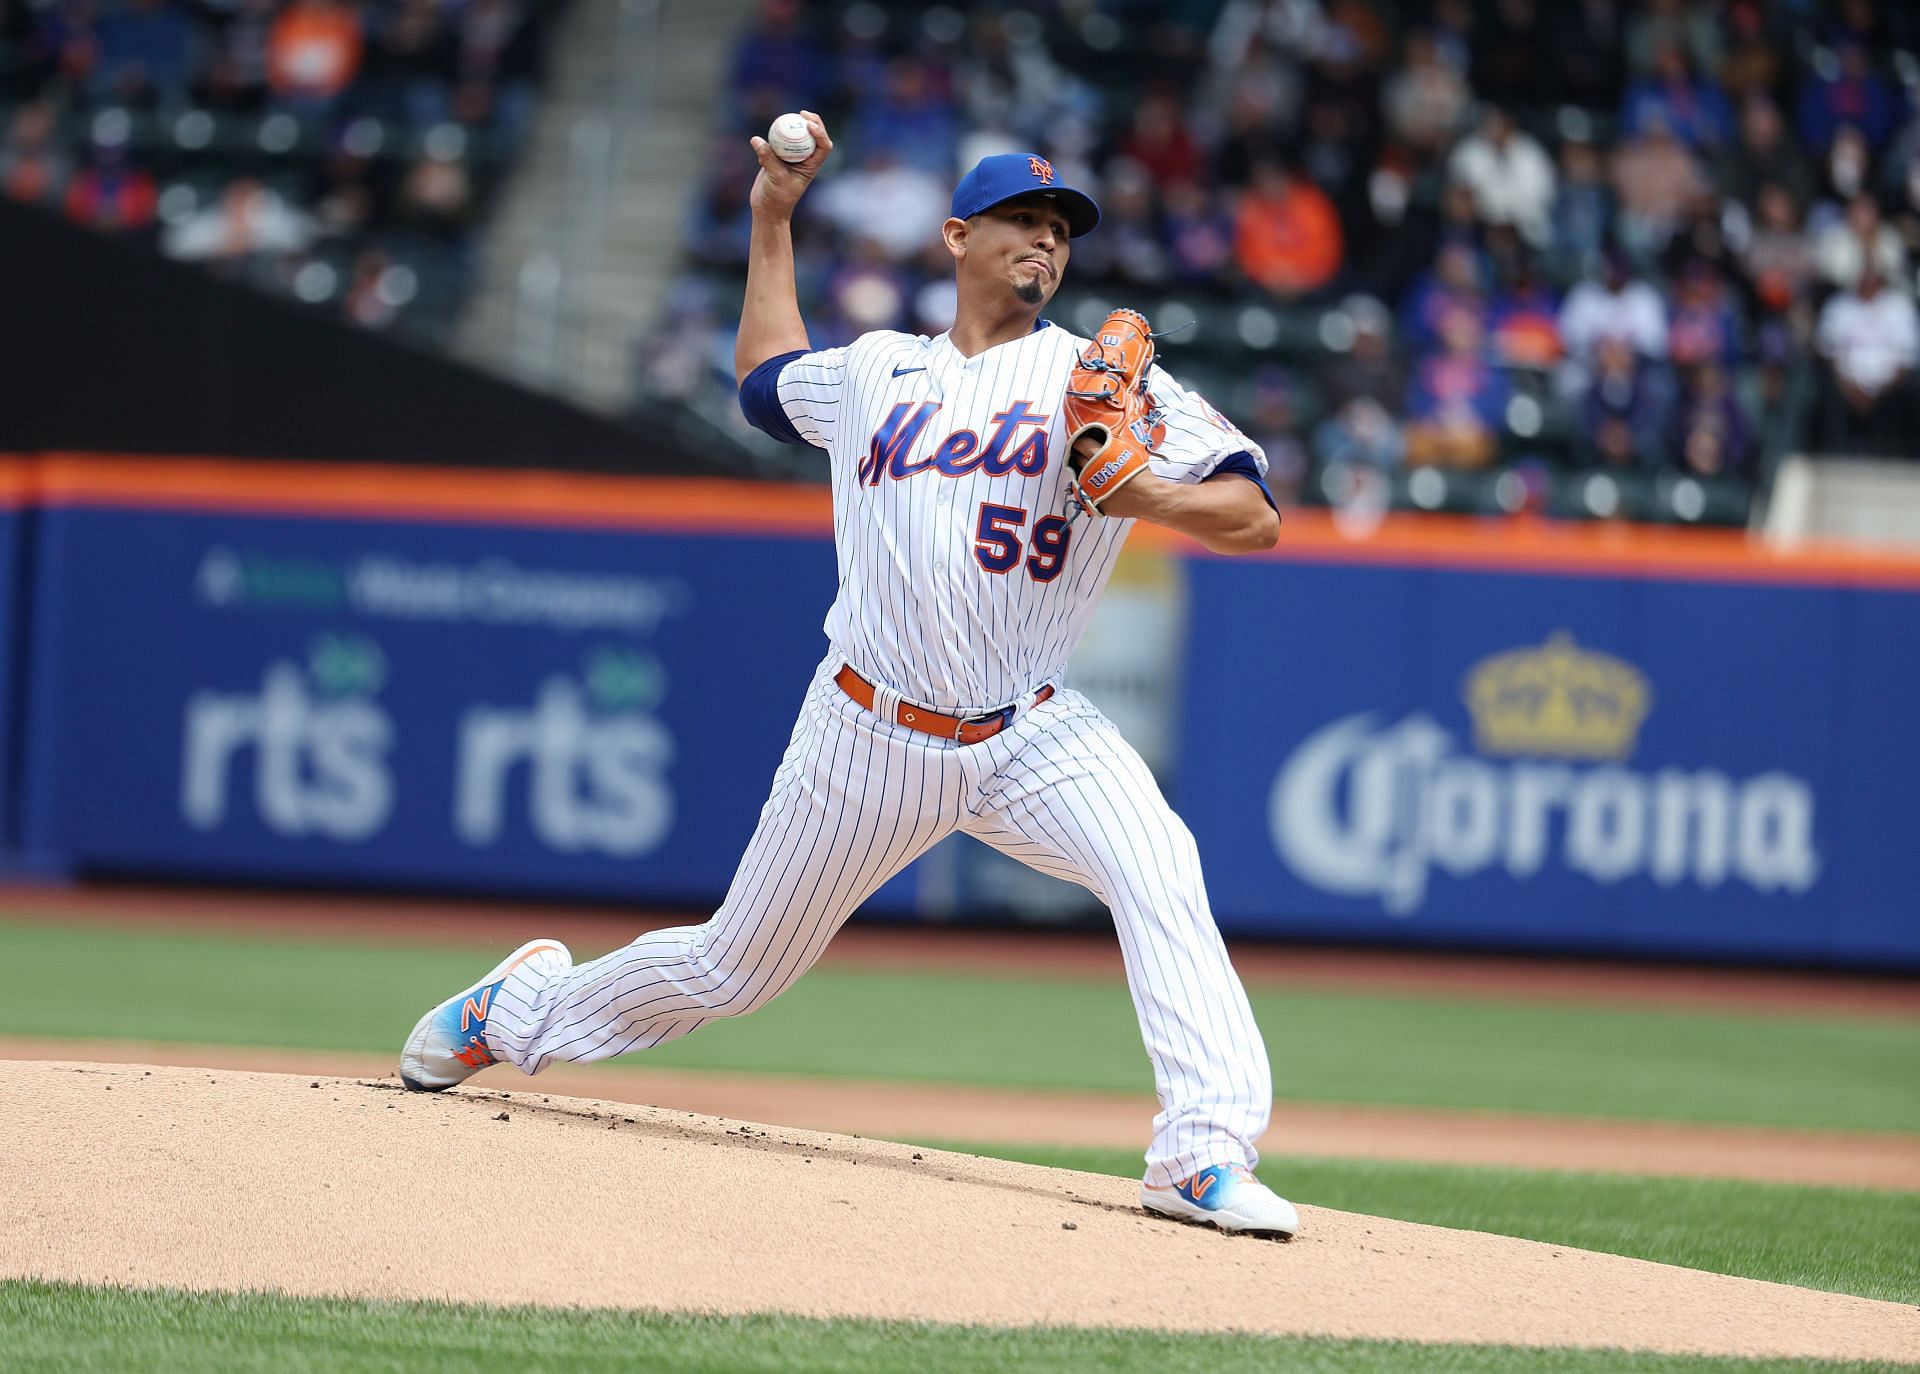 New York Mets pitcher Carrasco pitched 7.2 innings of two-run baseball. He struck out seven San Francisco Giants en route to his victory, keeping the Mets in his first place.